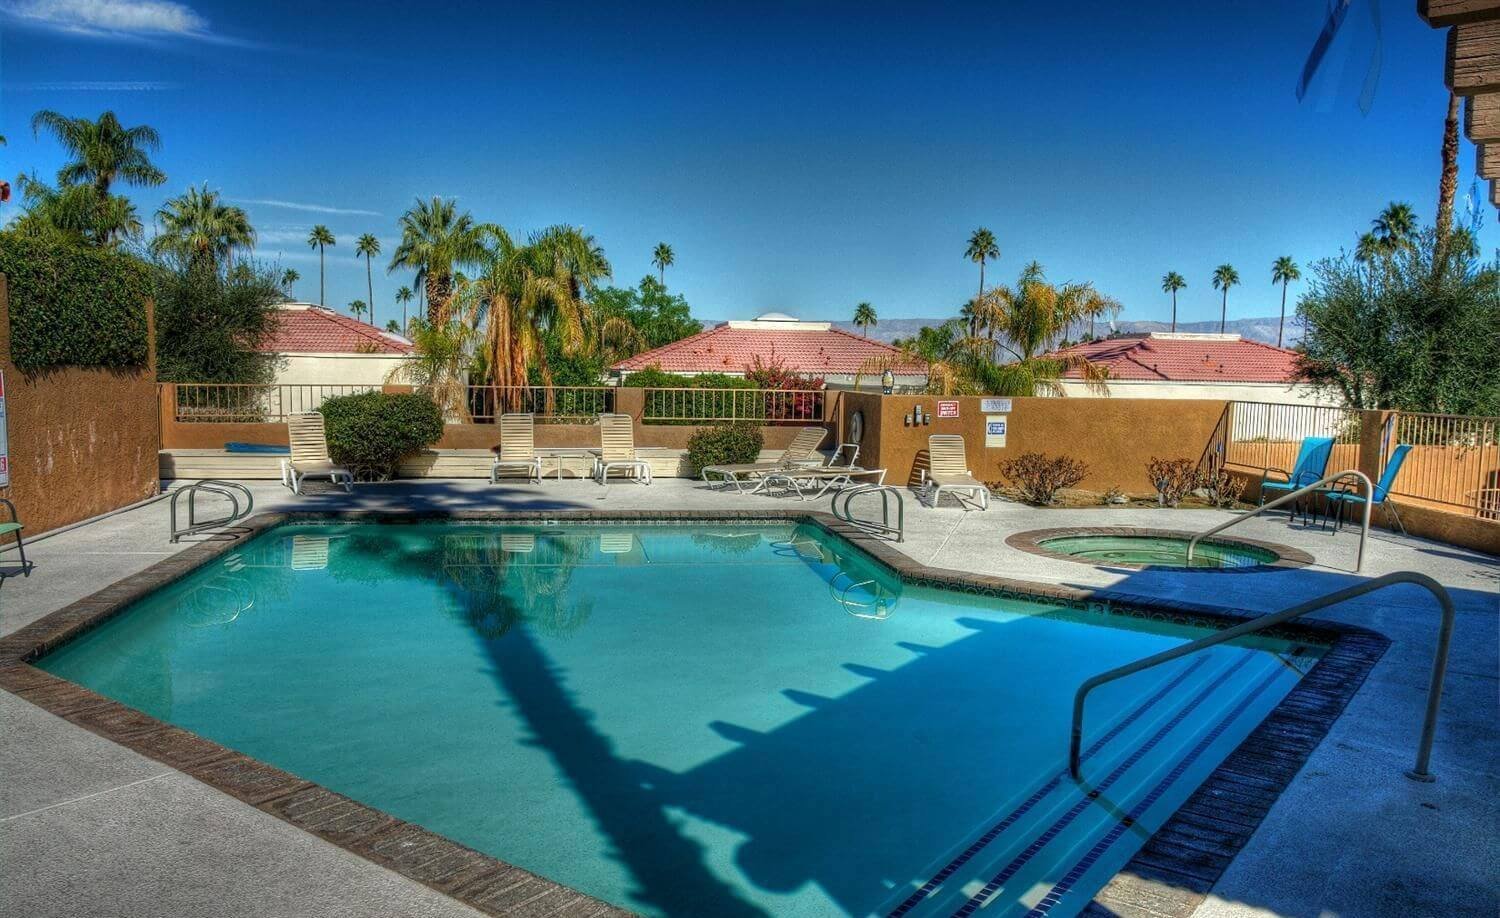 Ryway Cottages Palm Desert 92260